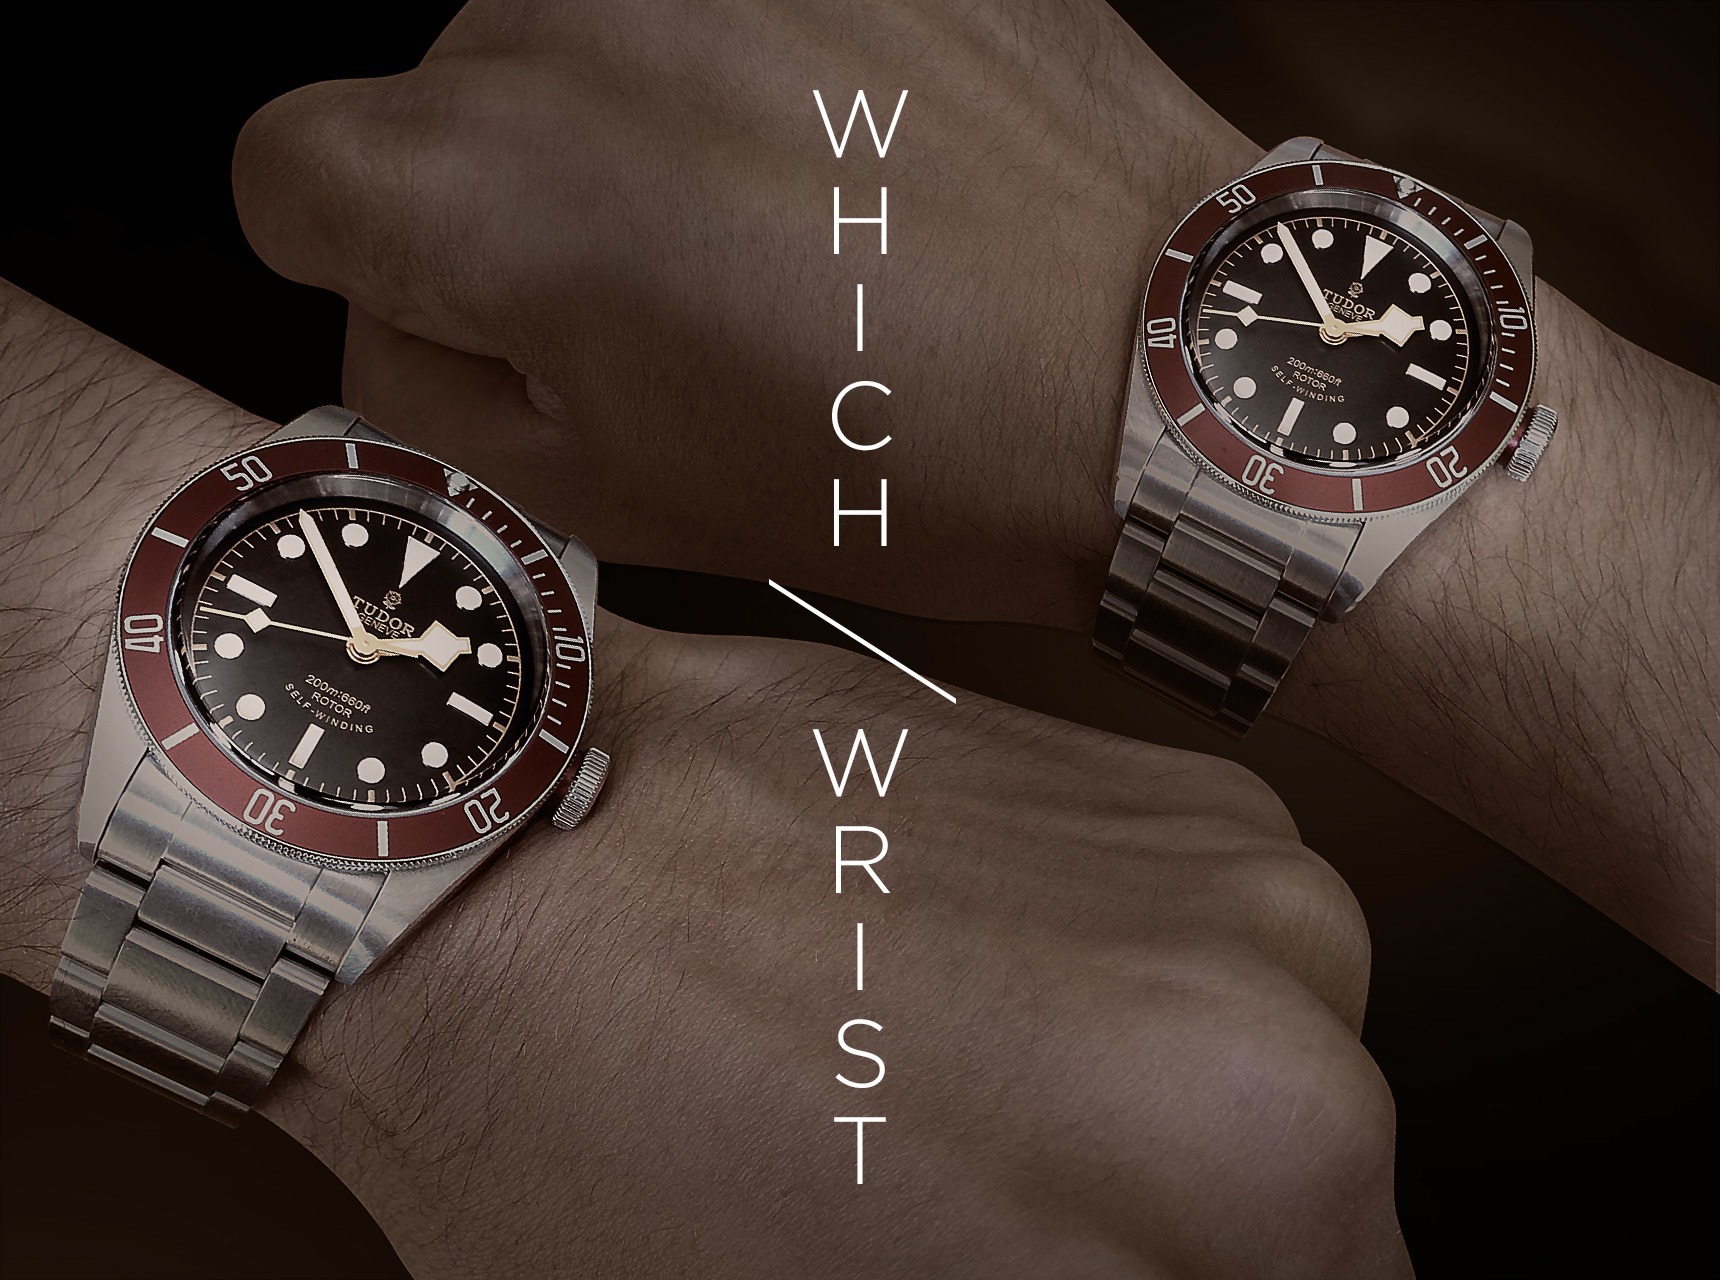 Which Hand Should I Wear My Watch On?